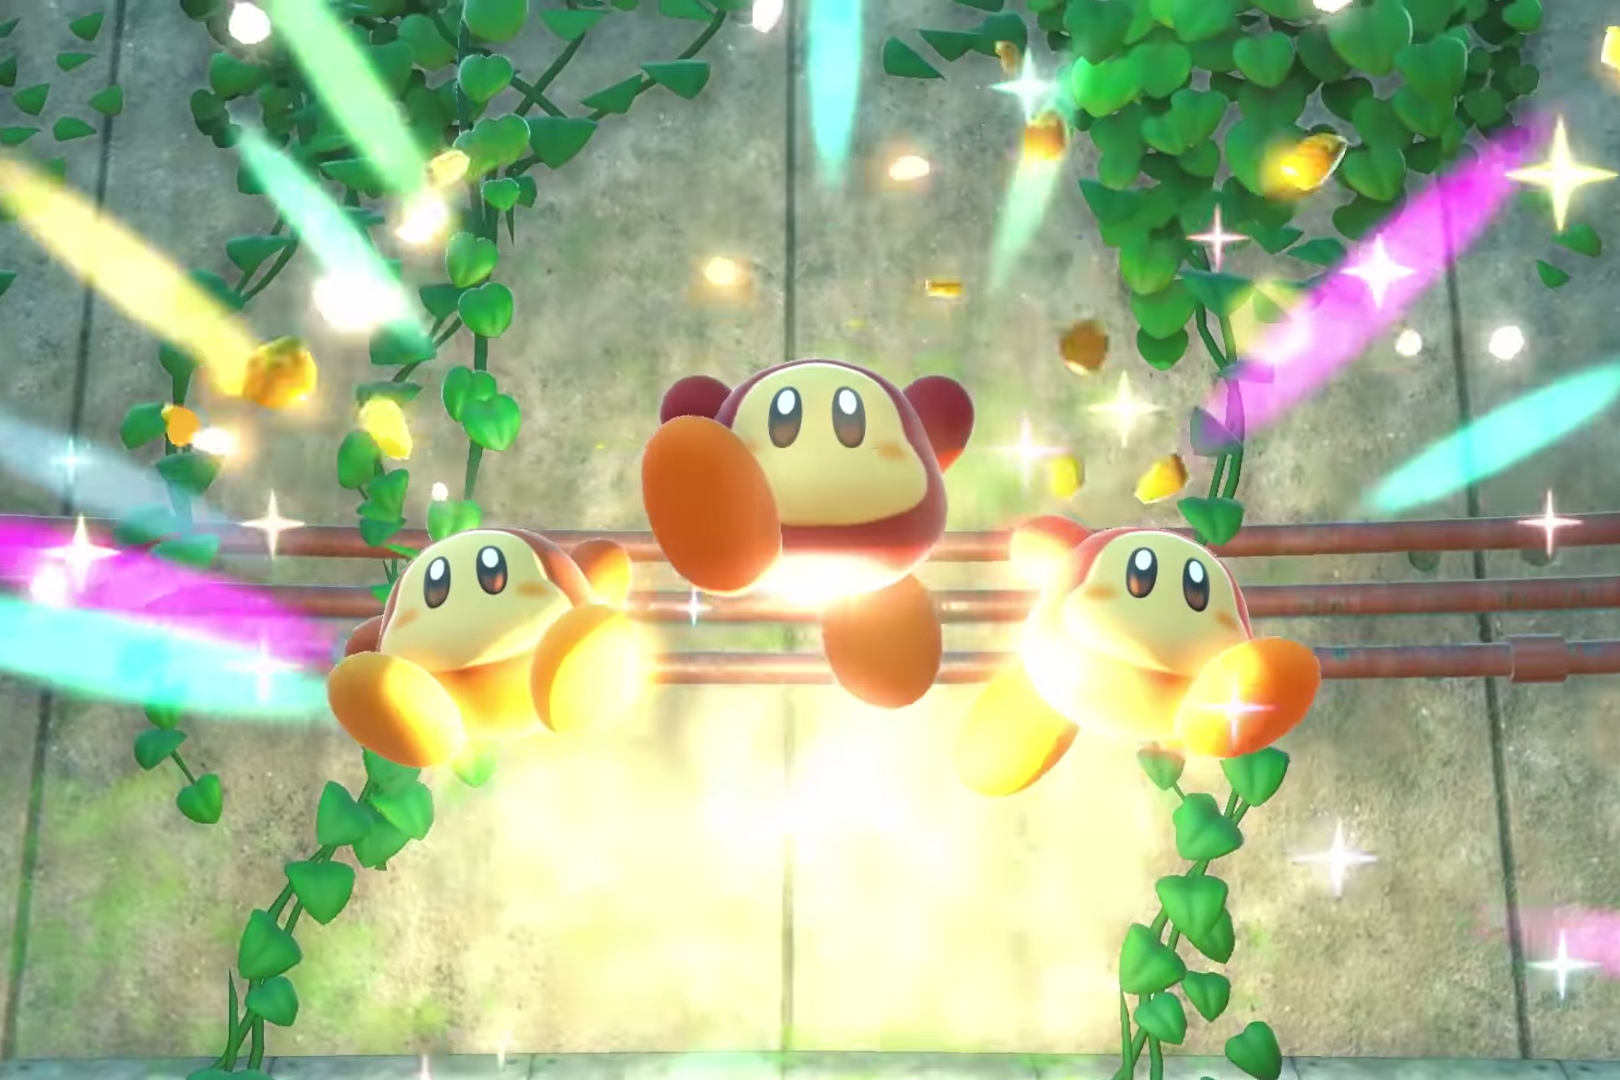 We're finally getting the Kirby co-op game for Switch that we deserve